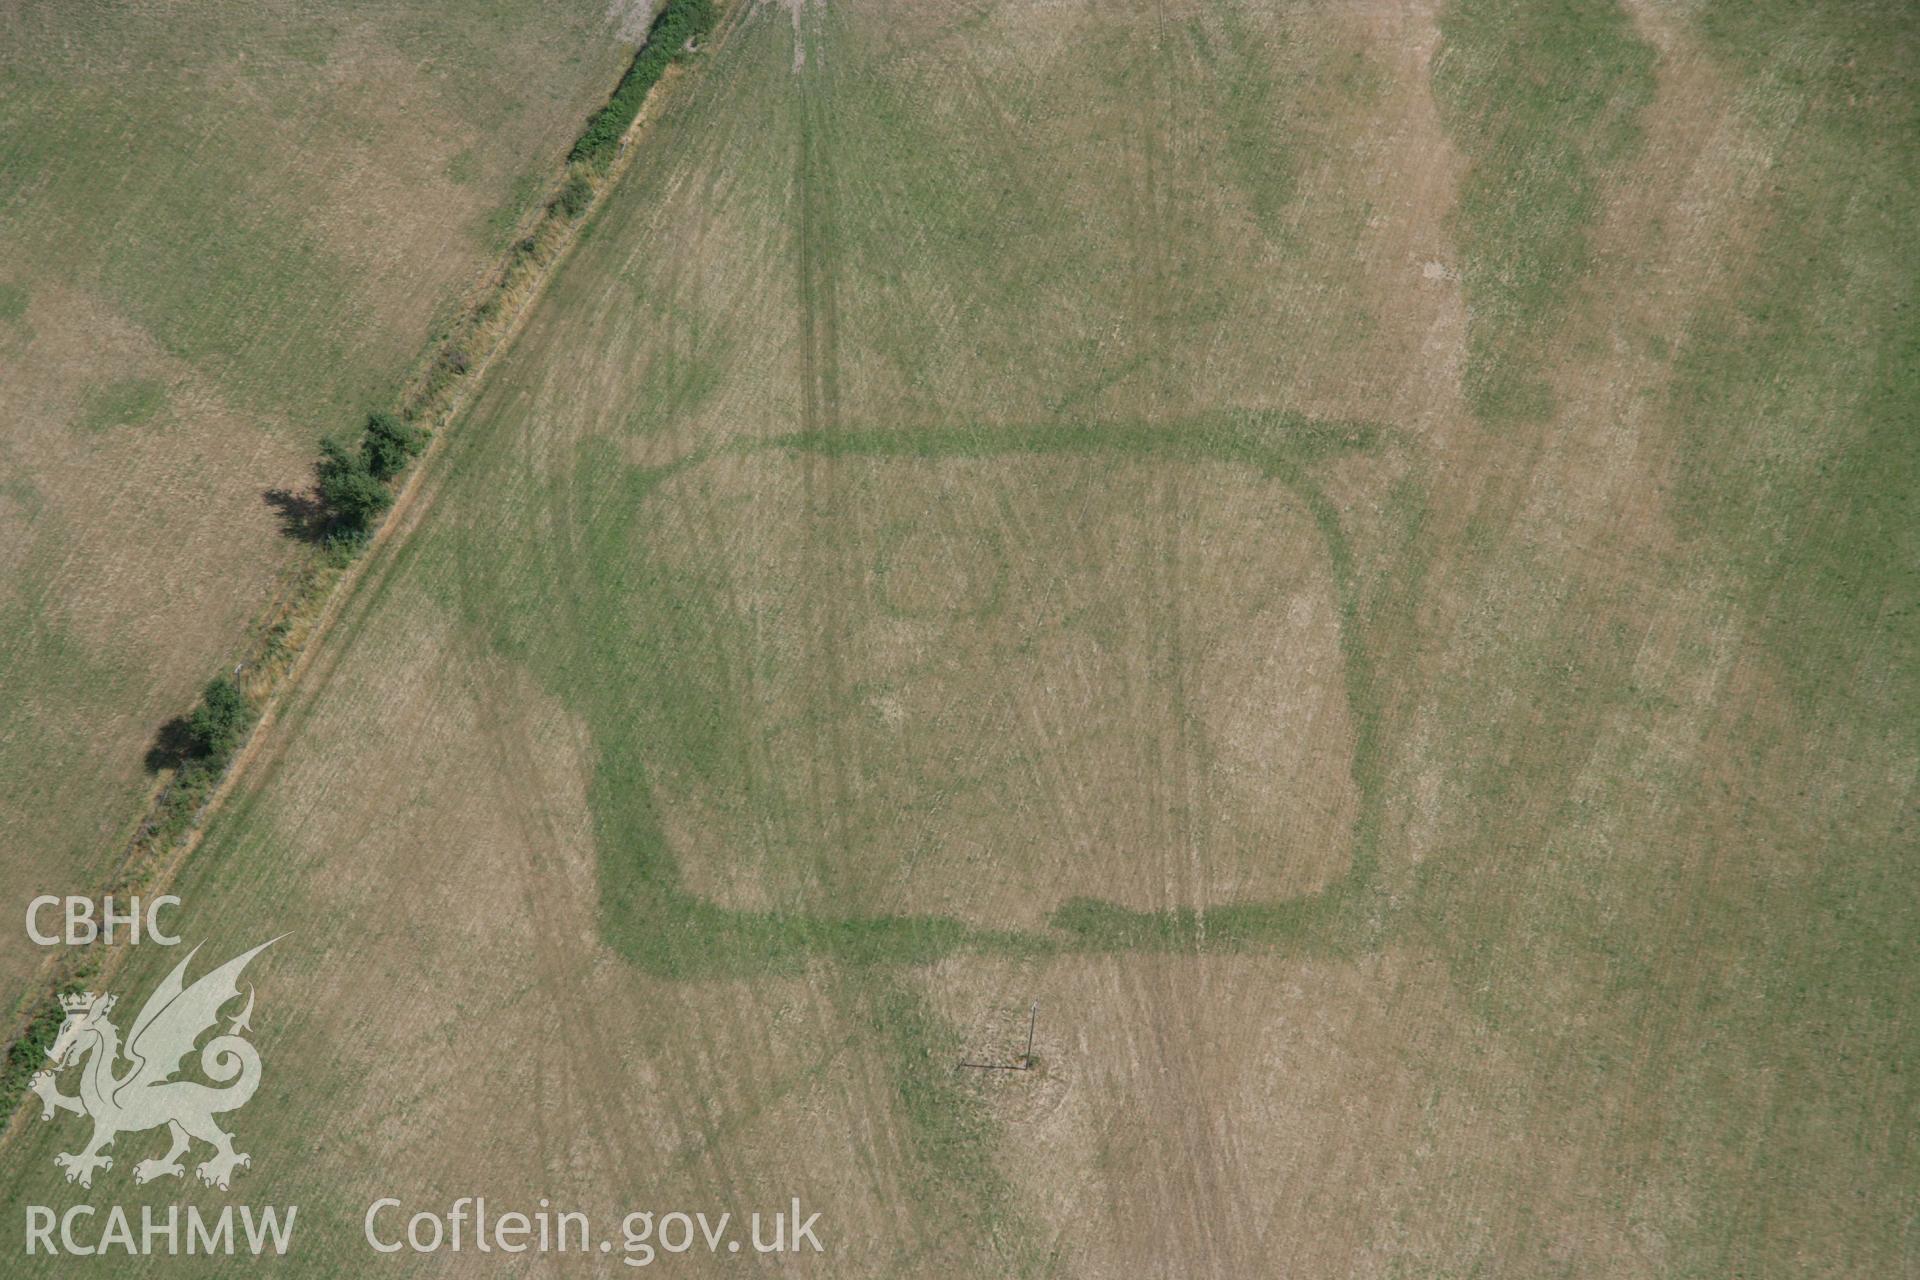 RCAHMW colour oblique aerial photograph of cropmark enclosures west of Caerau. Taken on 27 July 2006 by Toby Driver.